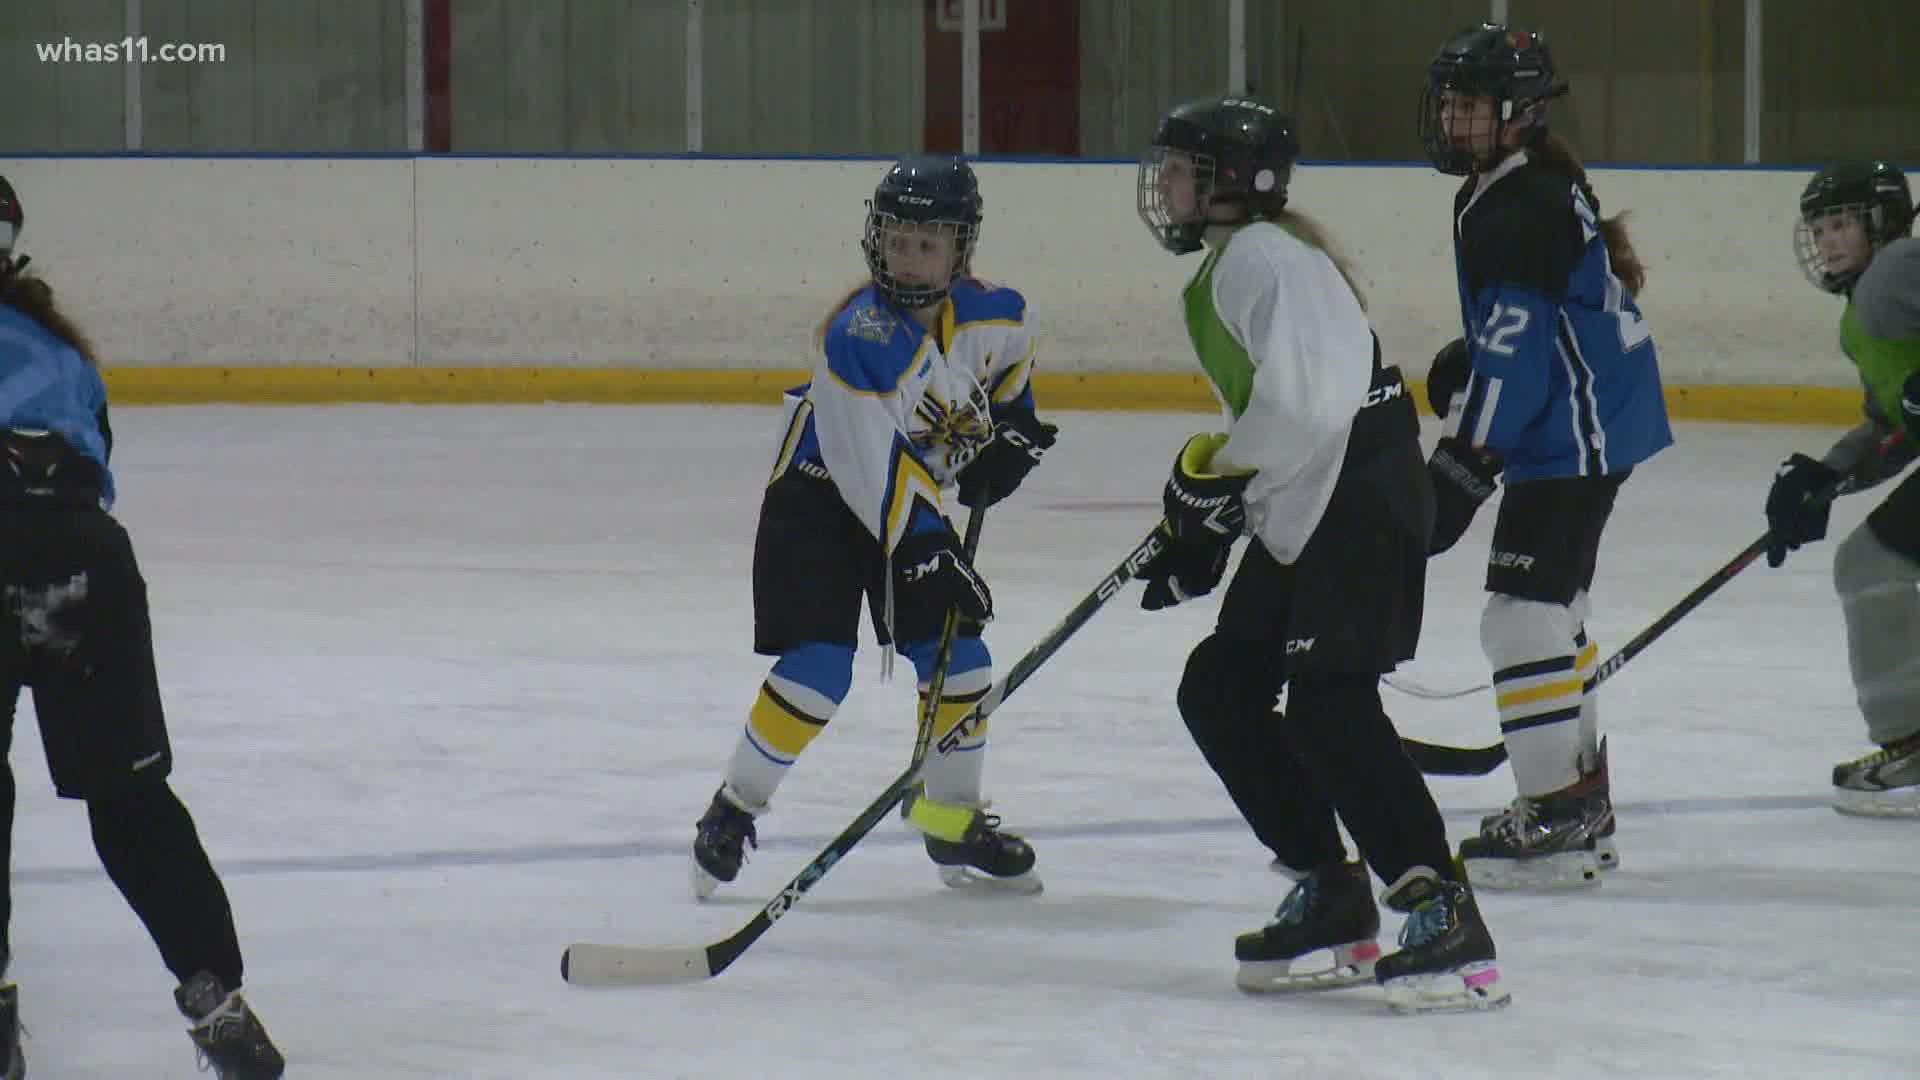 The coach said her focus is sharing the girls' love for the sport and getting more young women on the ice.